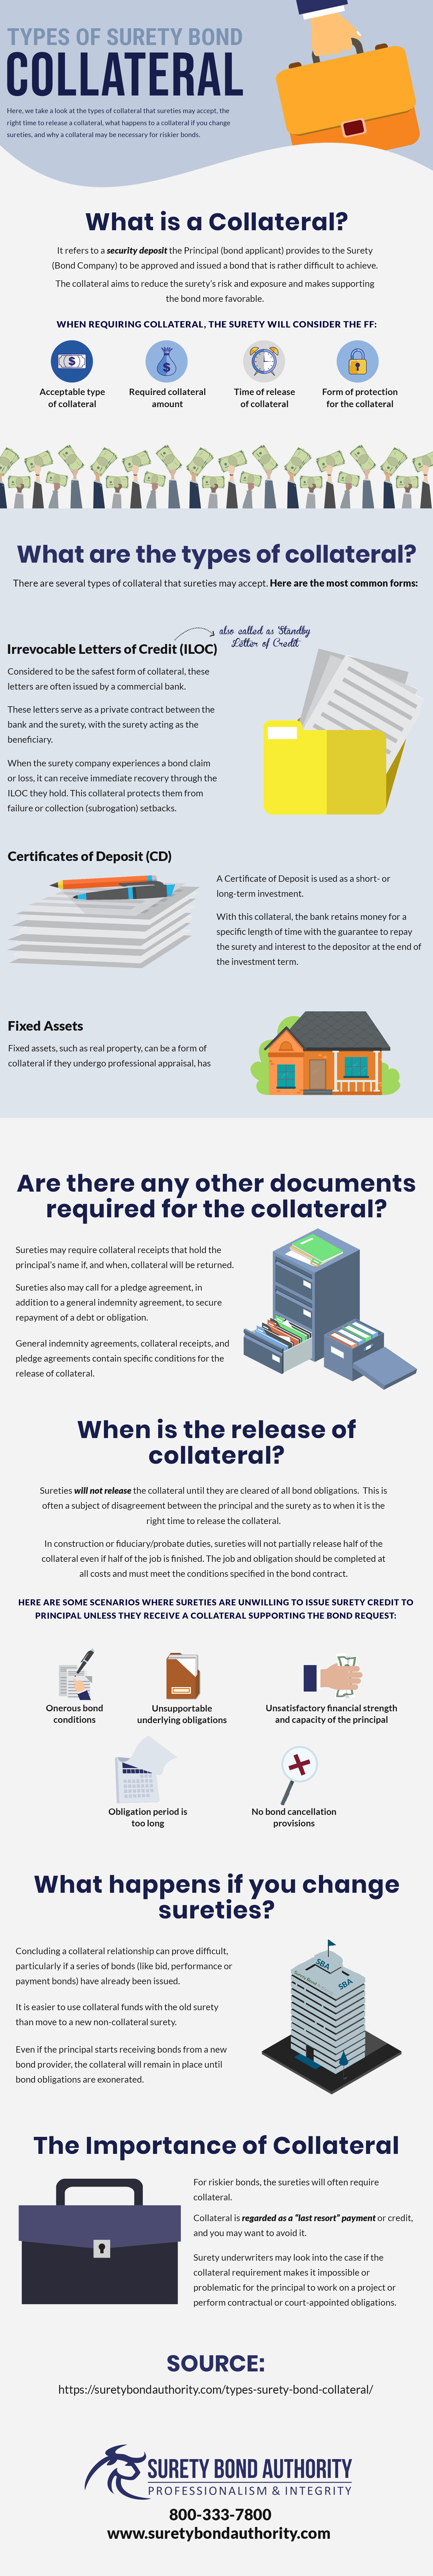 Types of Surety Bond Collateral Infographic